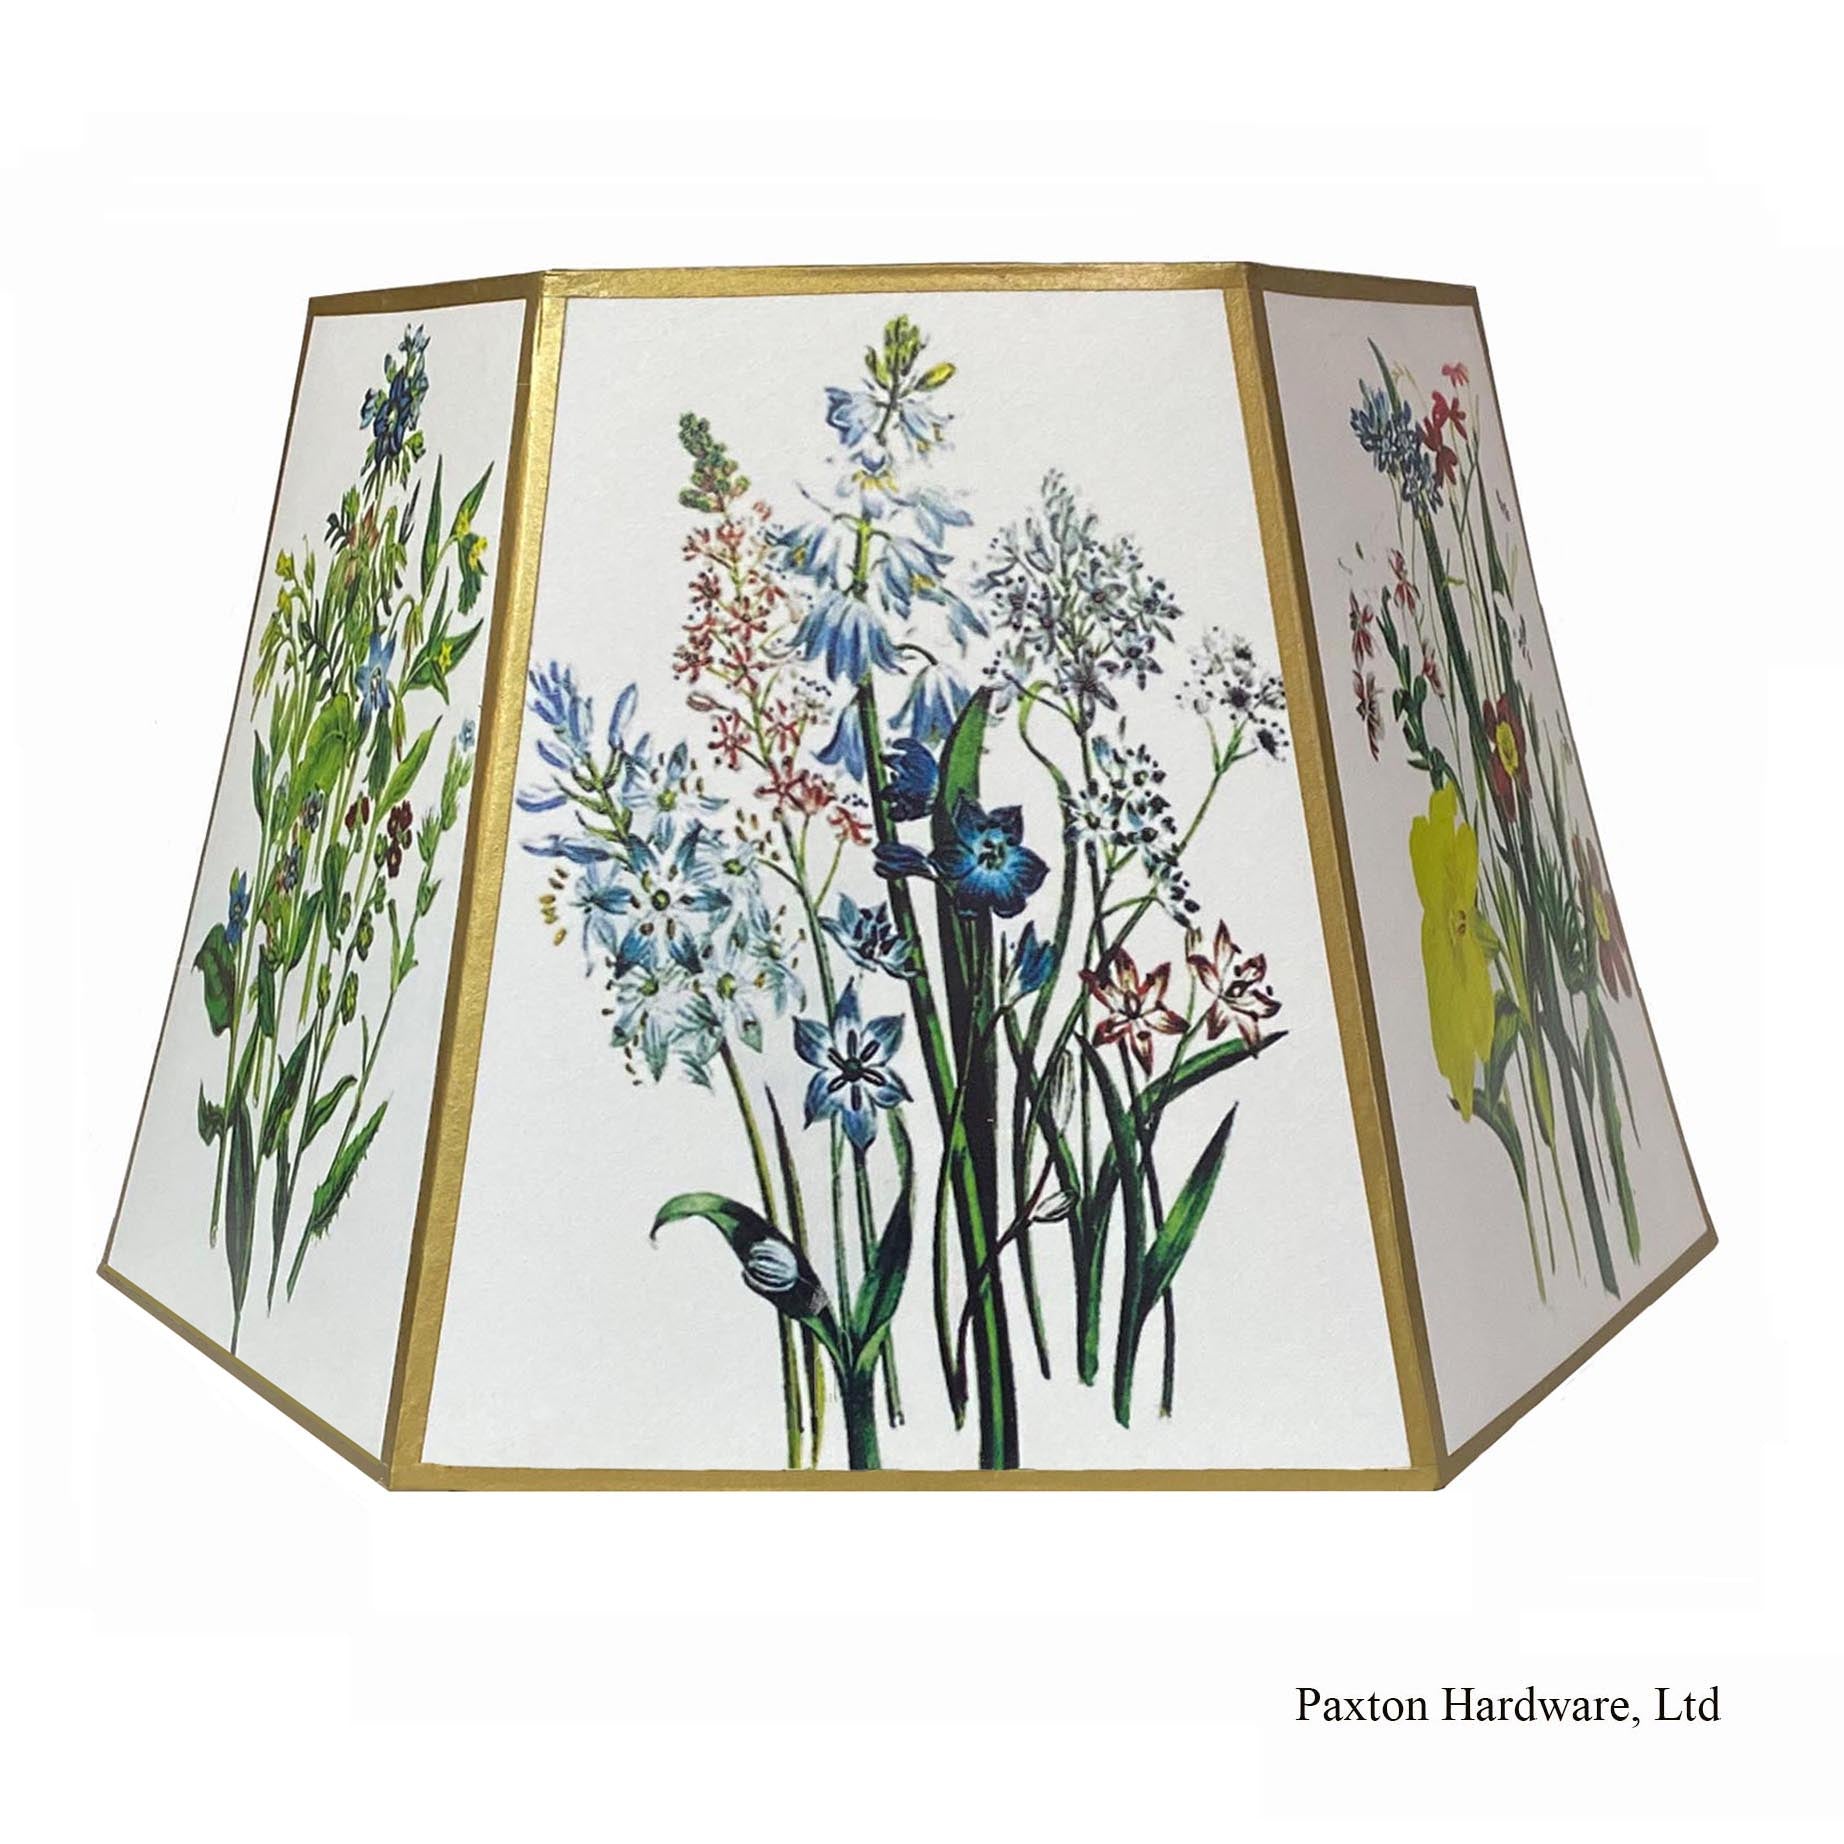 Lamp Shade with bouquets of flowers, Paxton hardware